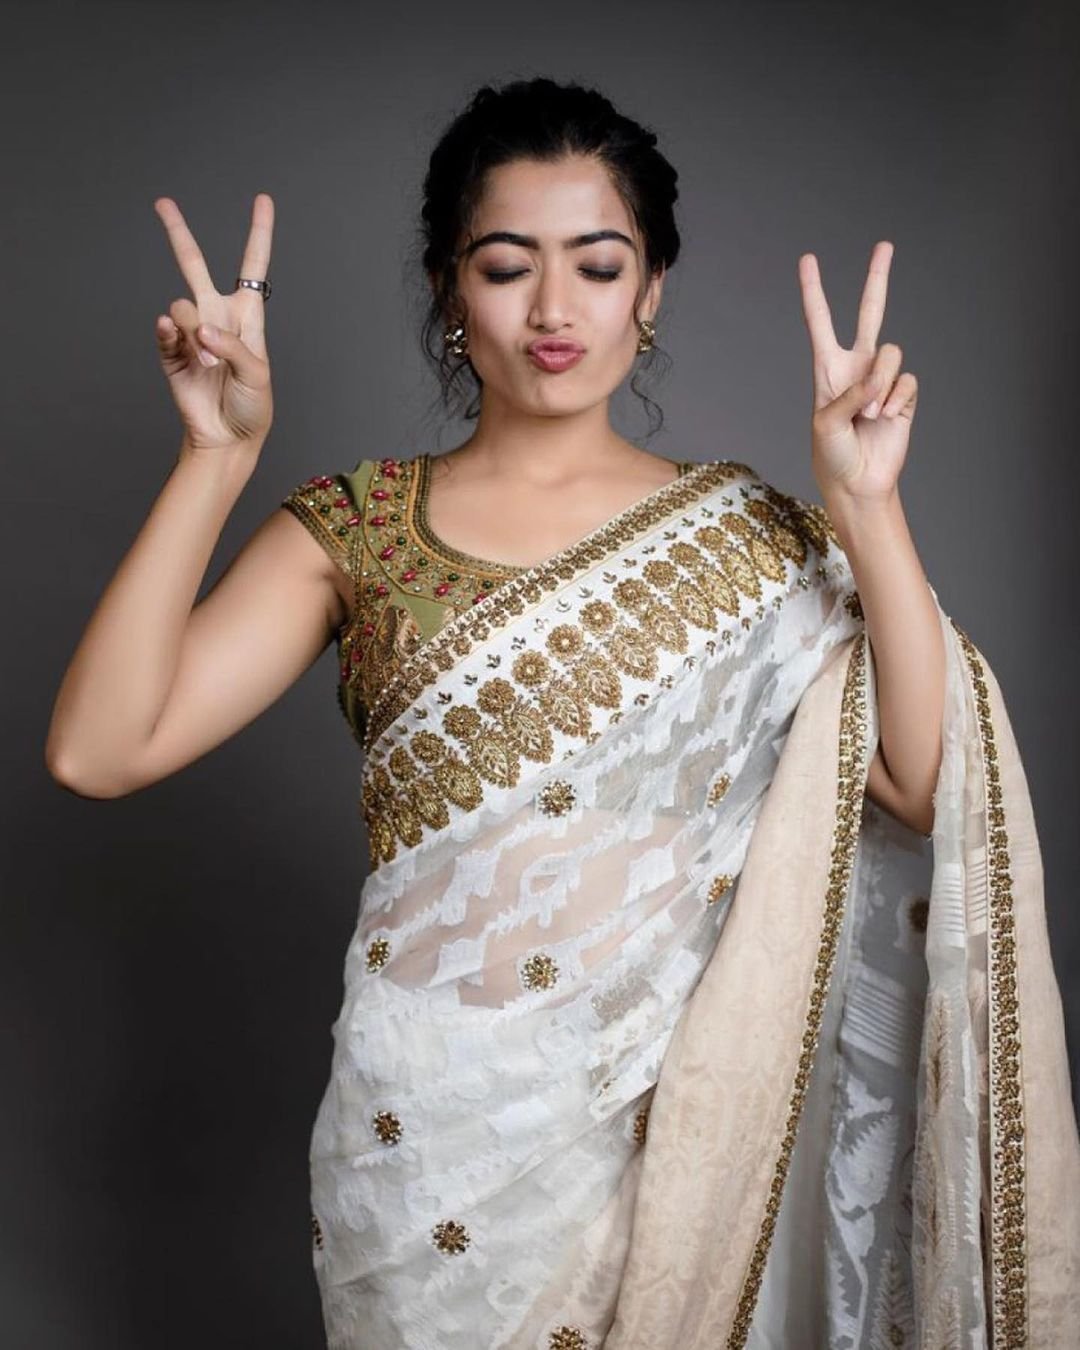 Expression Queen Rashmika Mandanna's crazy photos that will make you charm  - See Latest